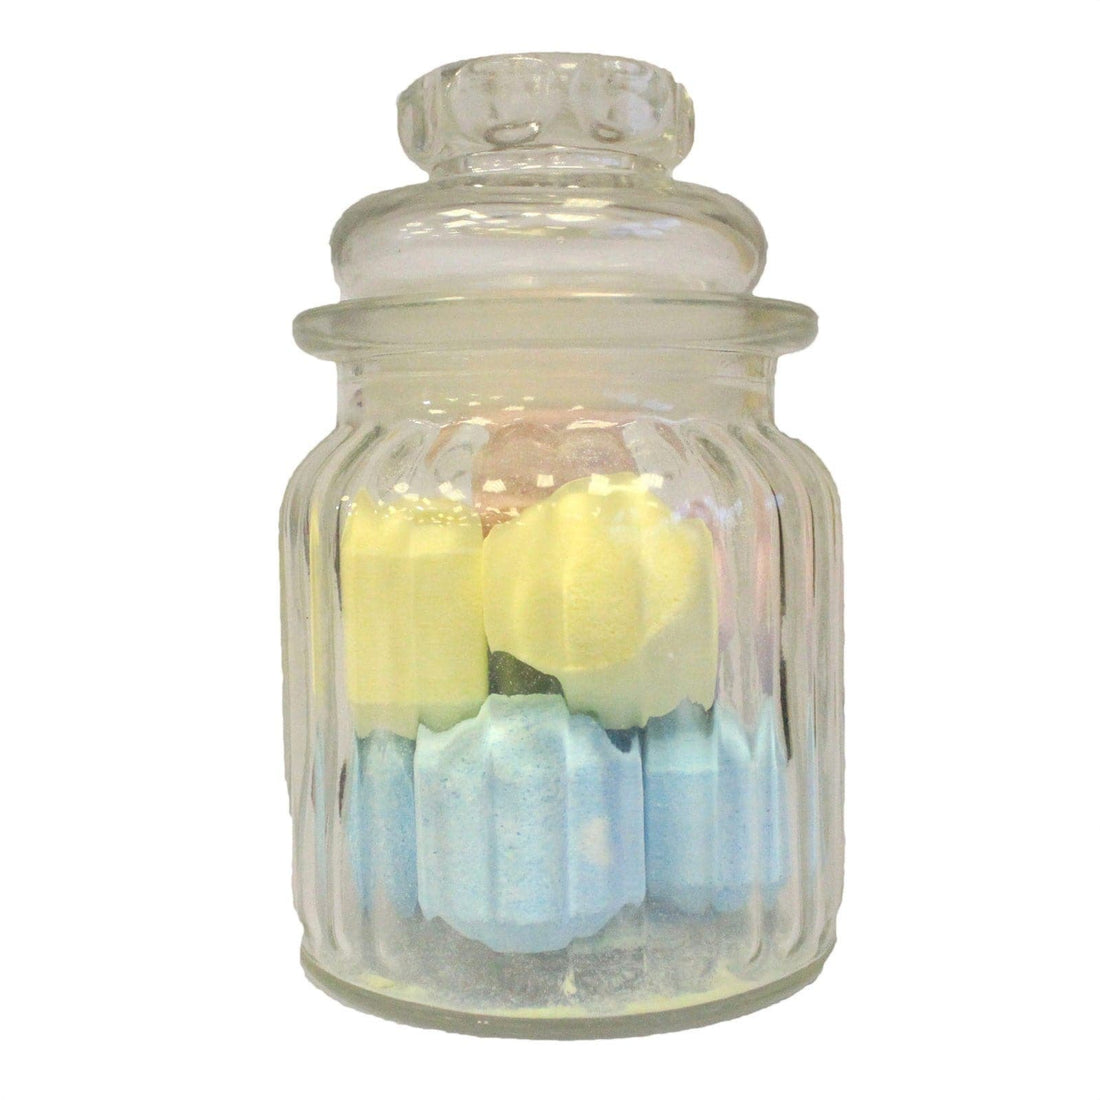 Candy Jars - Vertical Ribs - best price from Maltashopper.com CANDYJ-01